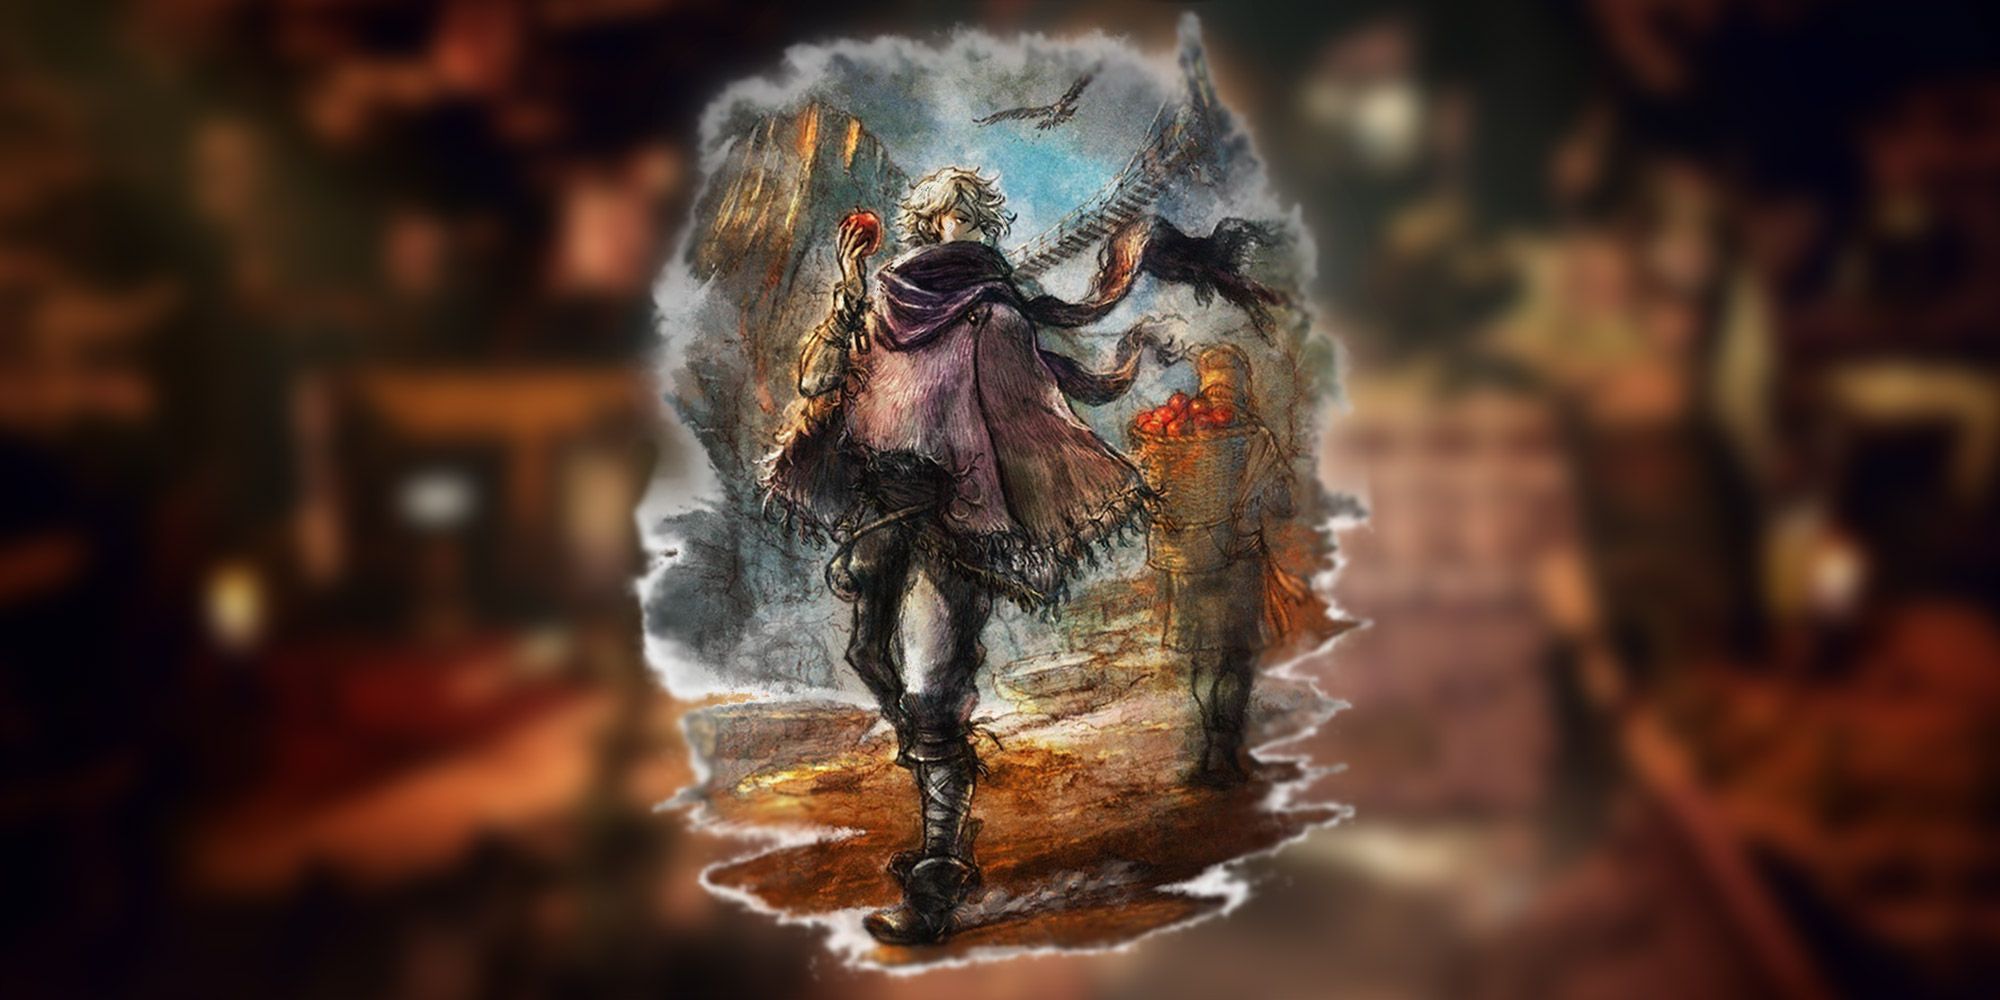 Octopath Traveler Therion